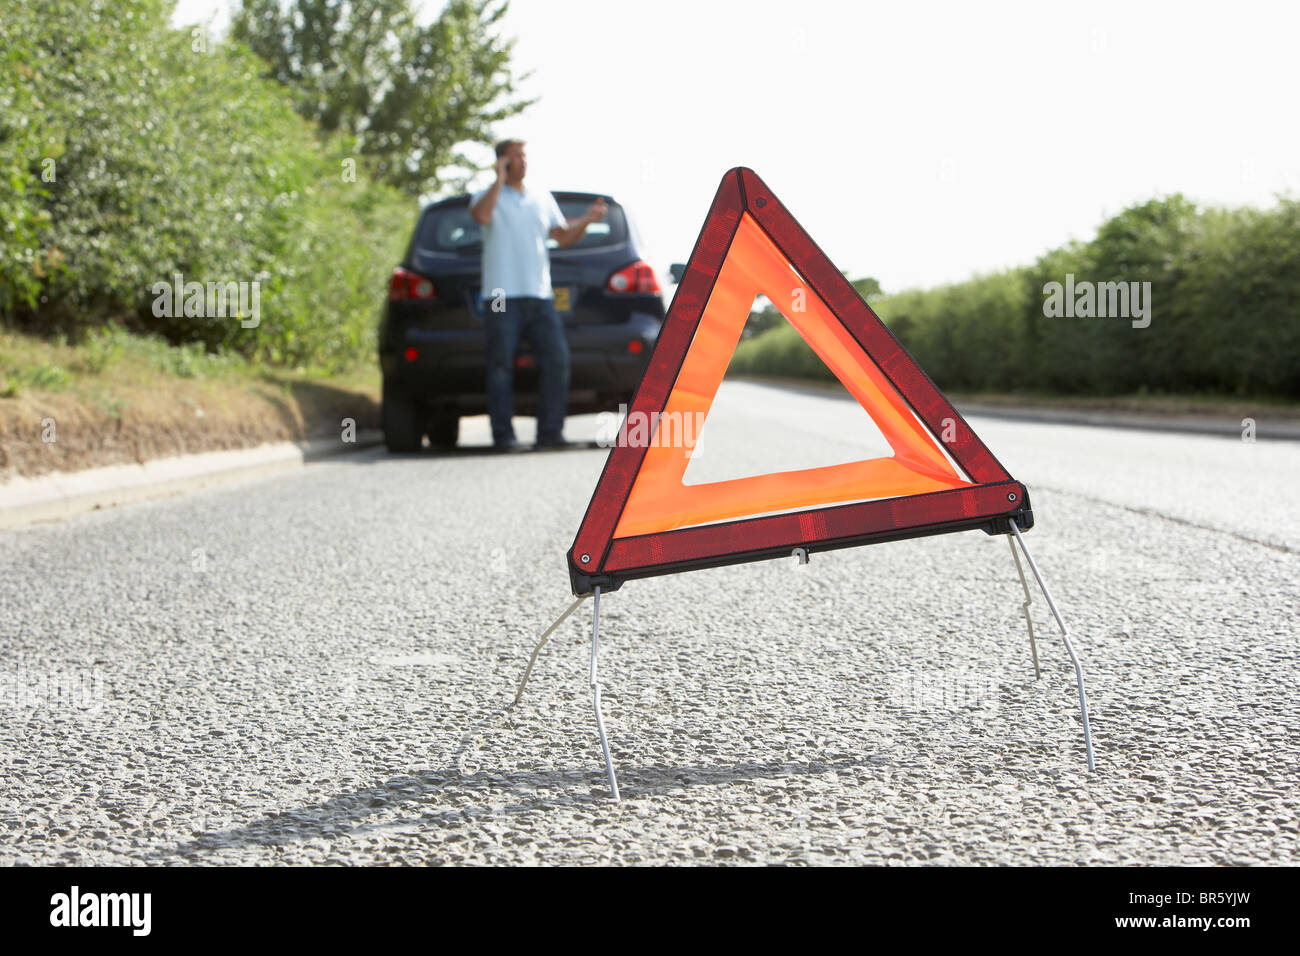 Driver Broken Down On Country Road With Hazard Warning Sign In Foreground Stock Photo